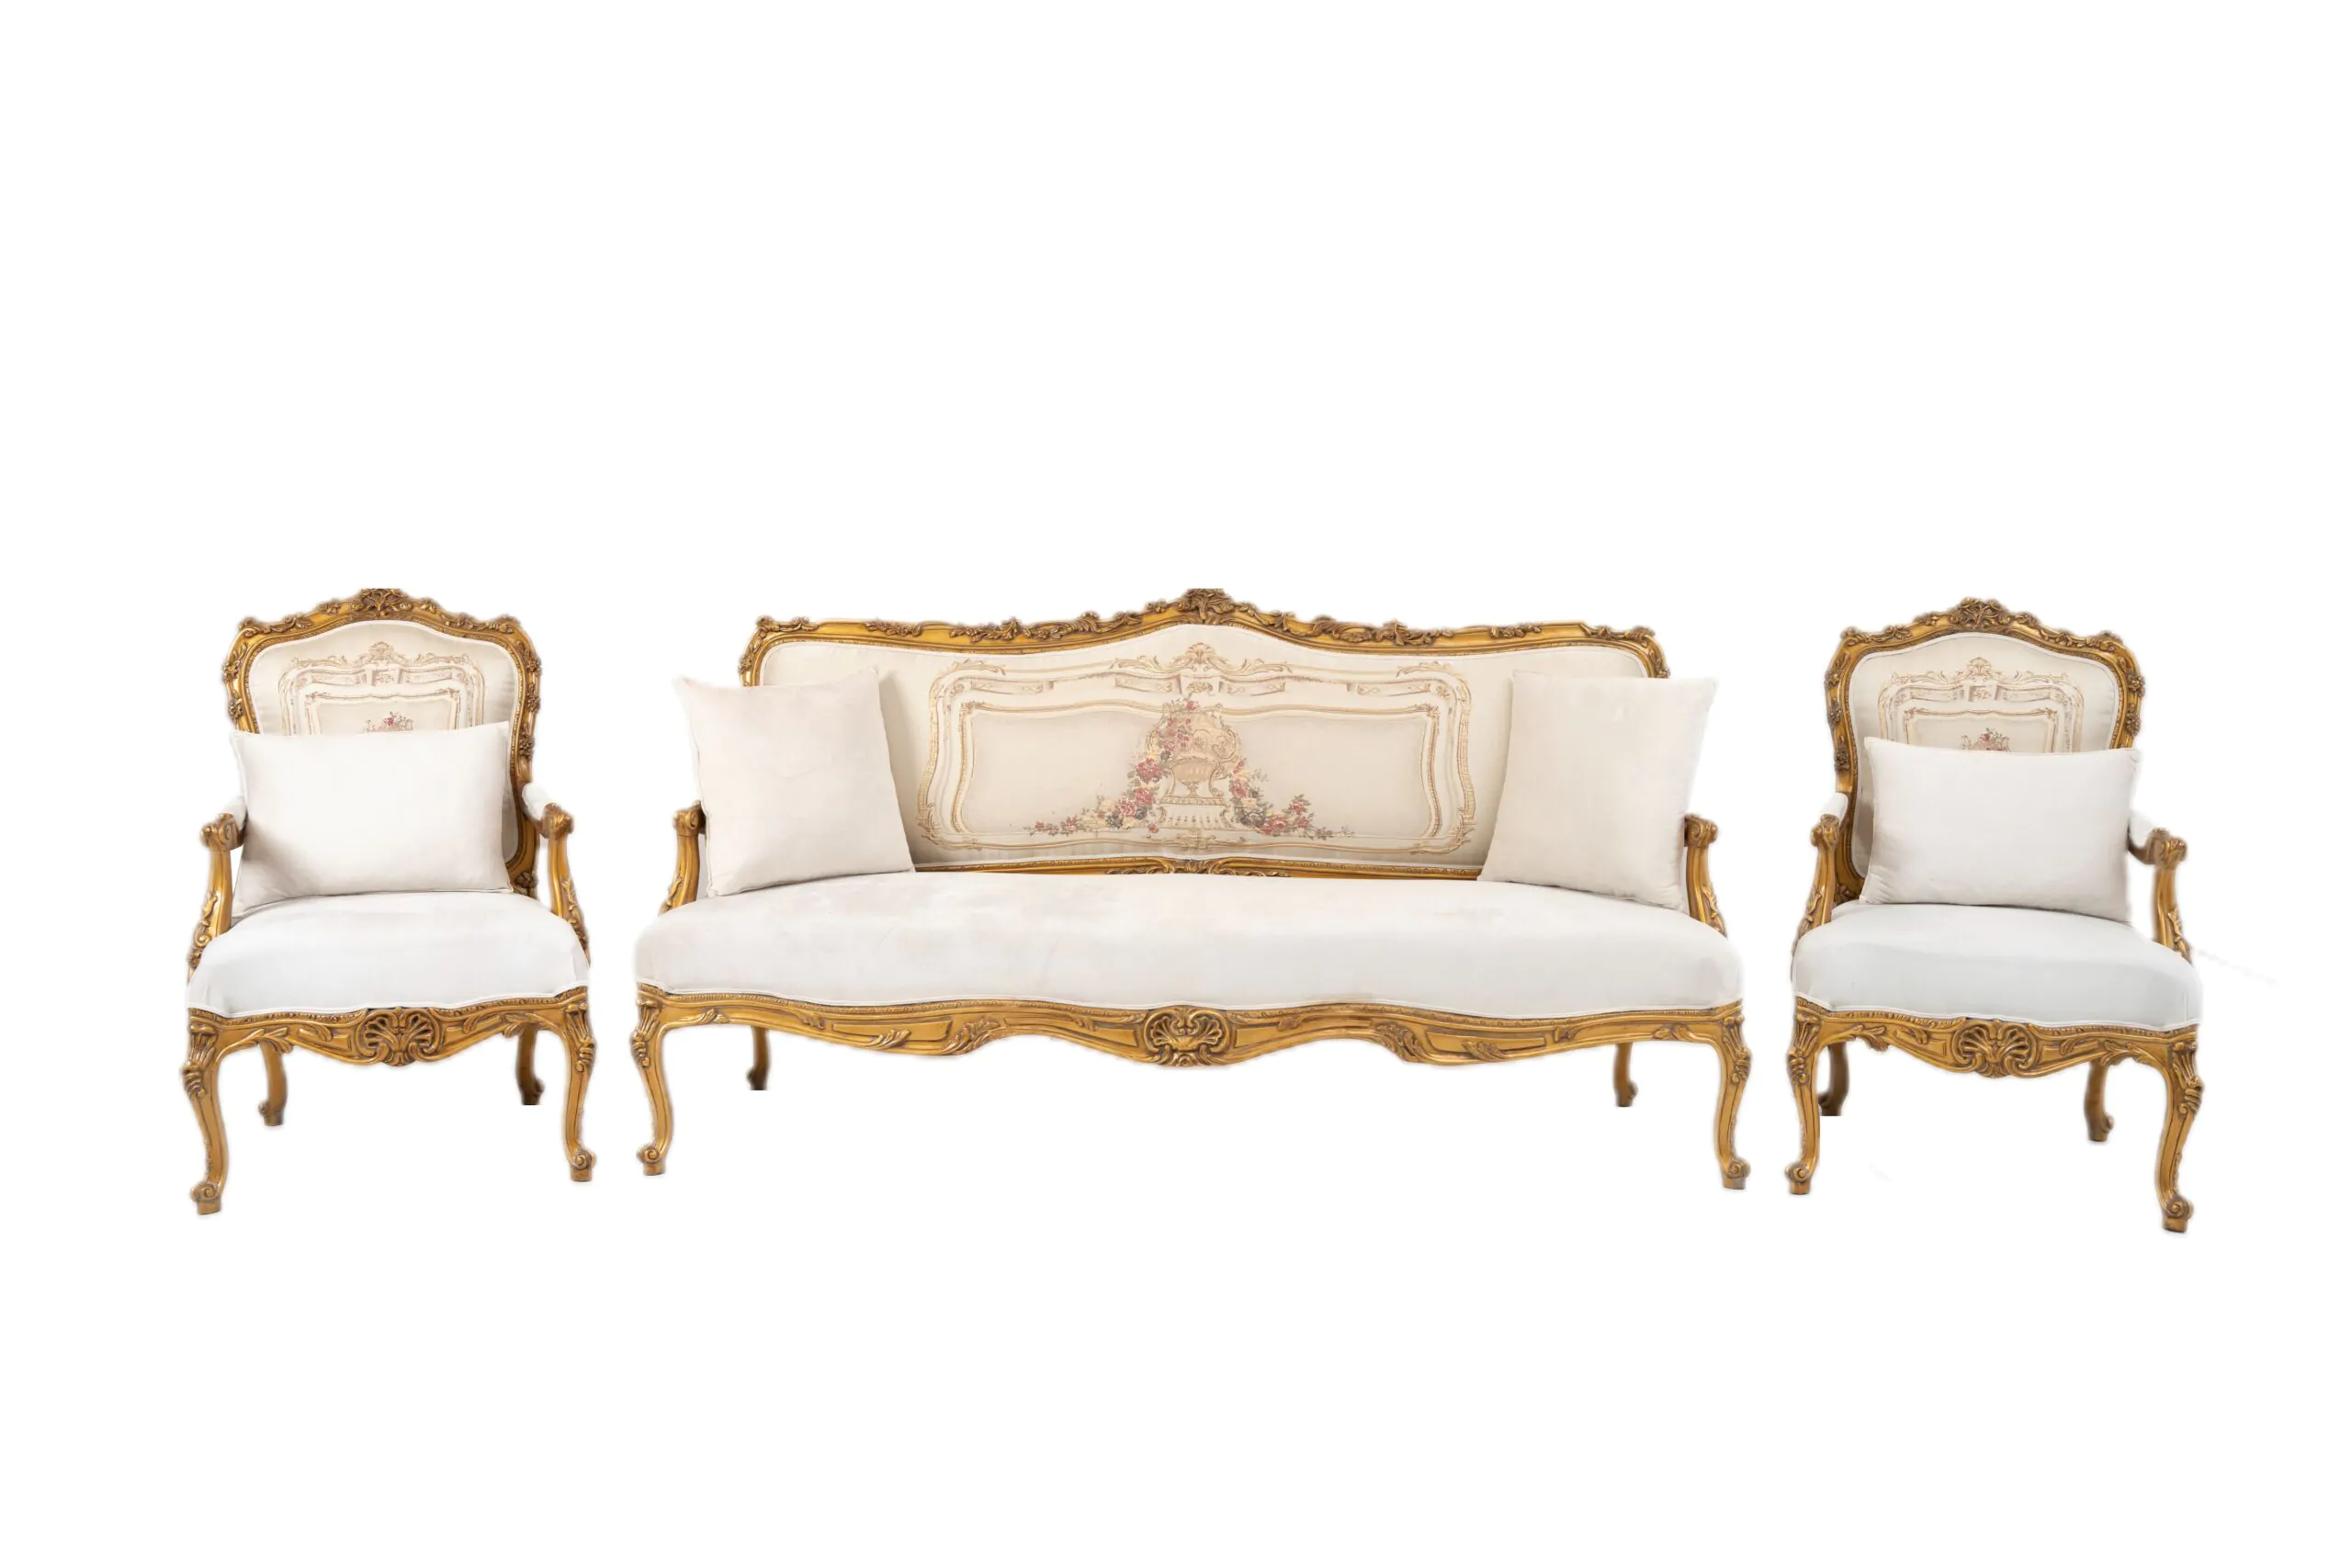 Italian Gold Sofa – A Luxurious Addition to Your Home